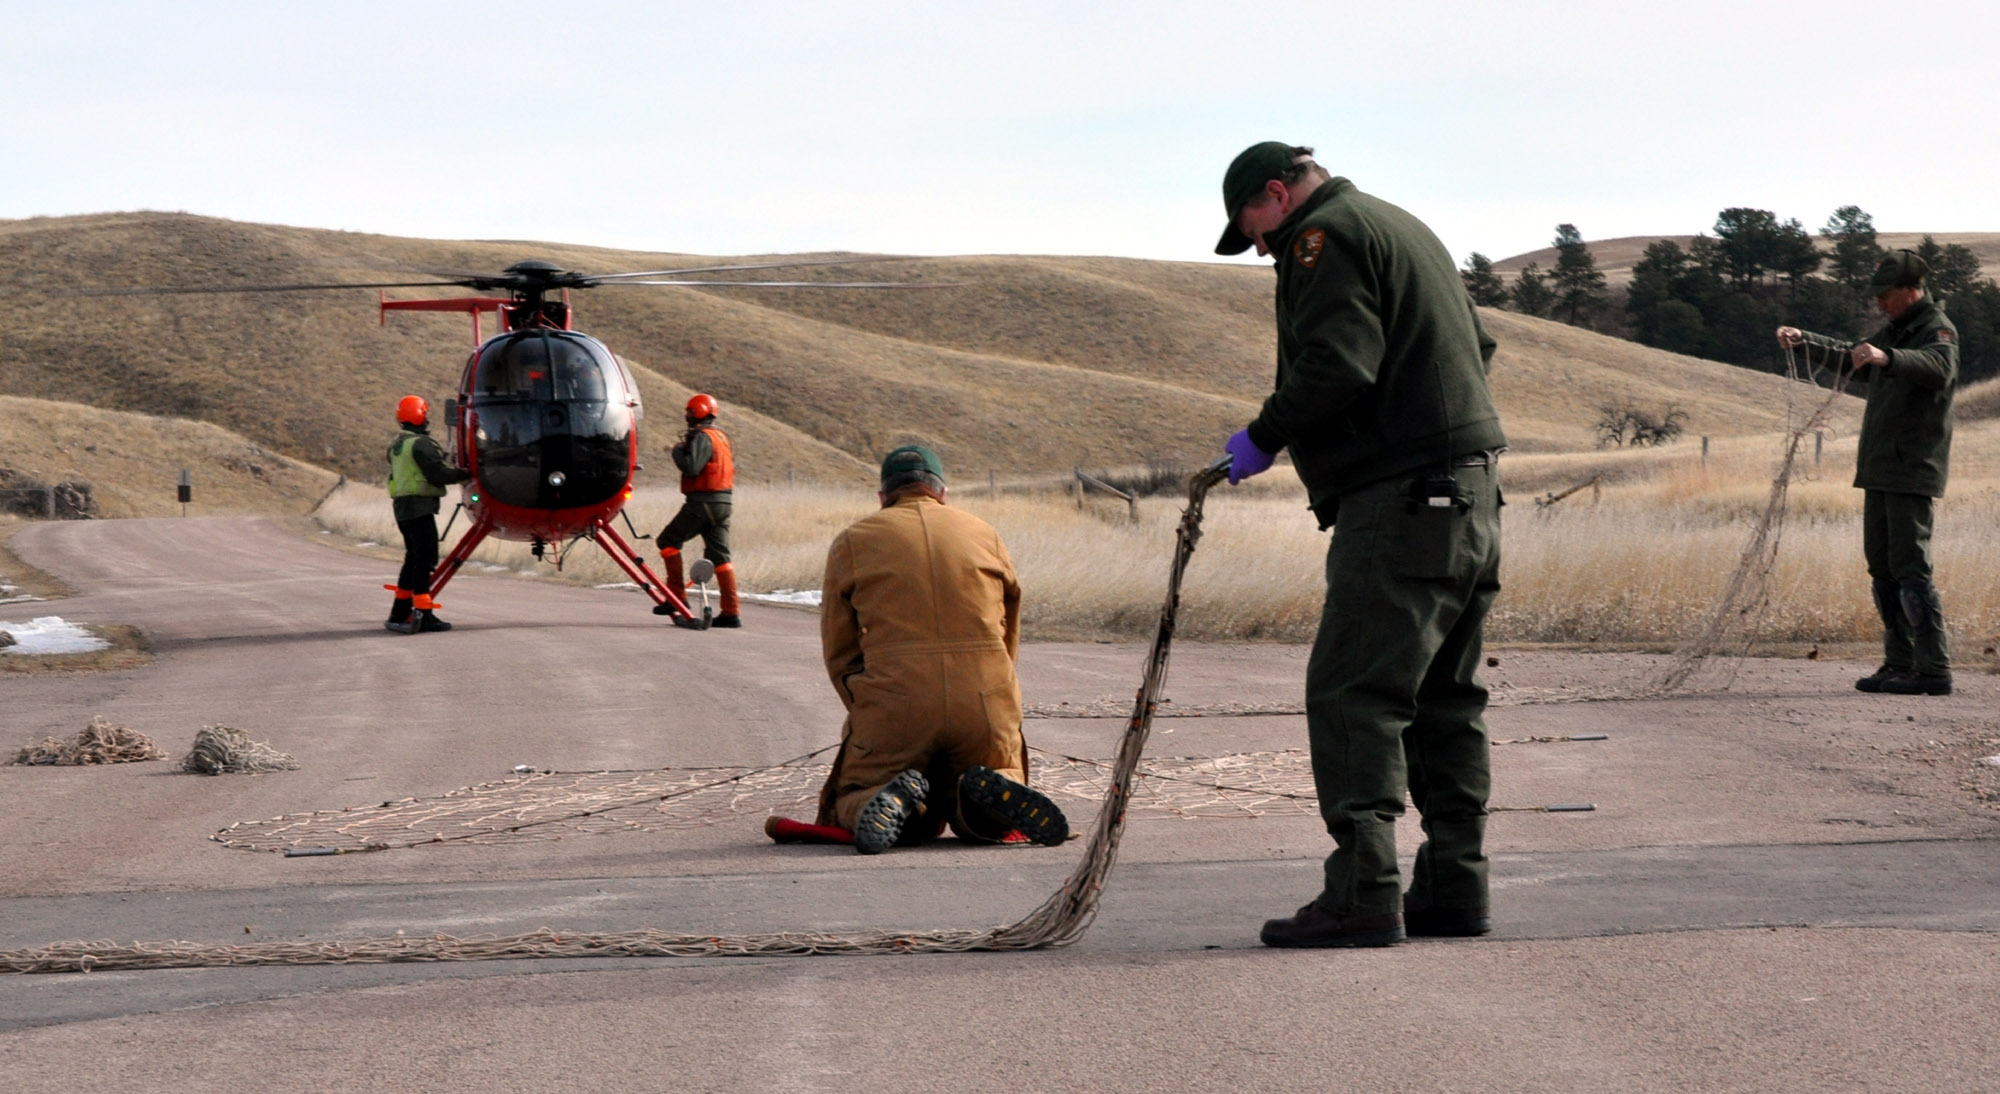 Crew members from Leading Edge Aviation prepare to board their helicopter while, from left, Dr. Glen Sargeant, Dan Roddy, and Duane Weber repackage nets used to capture elk.